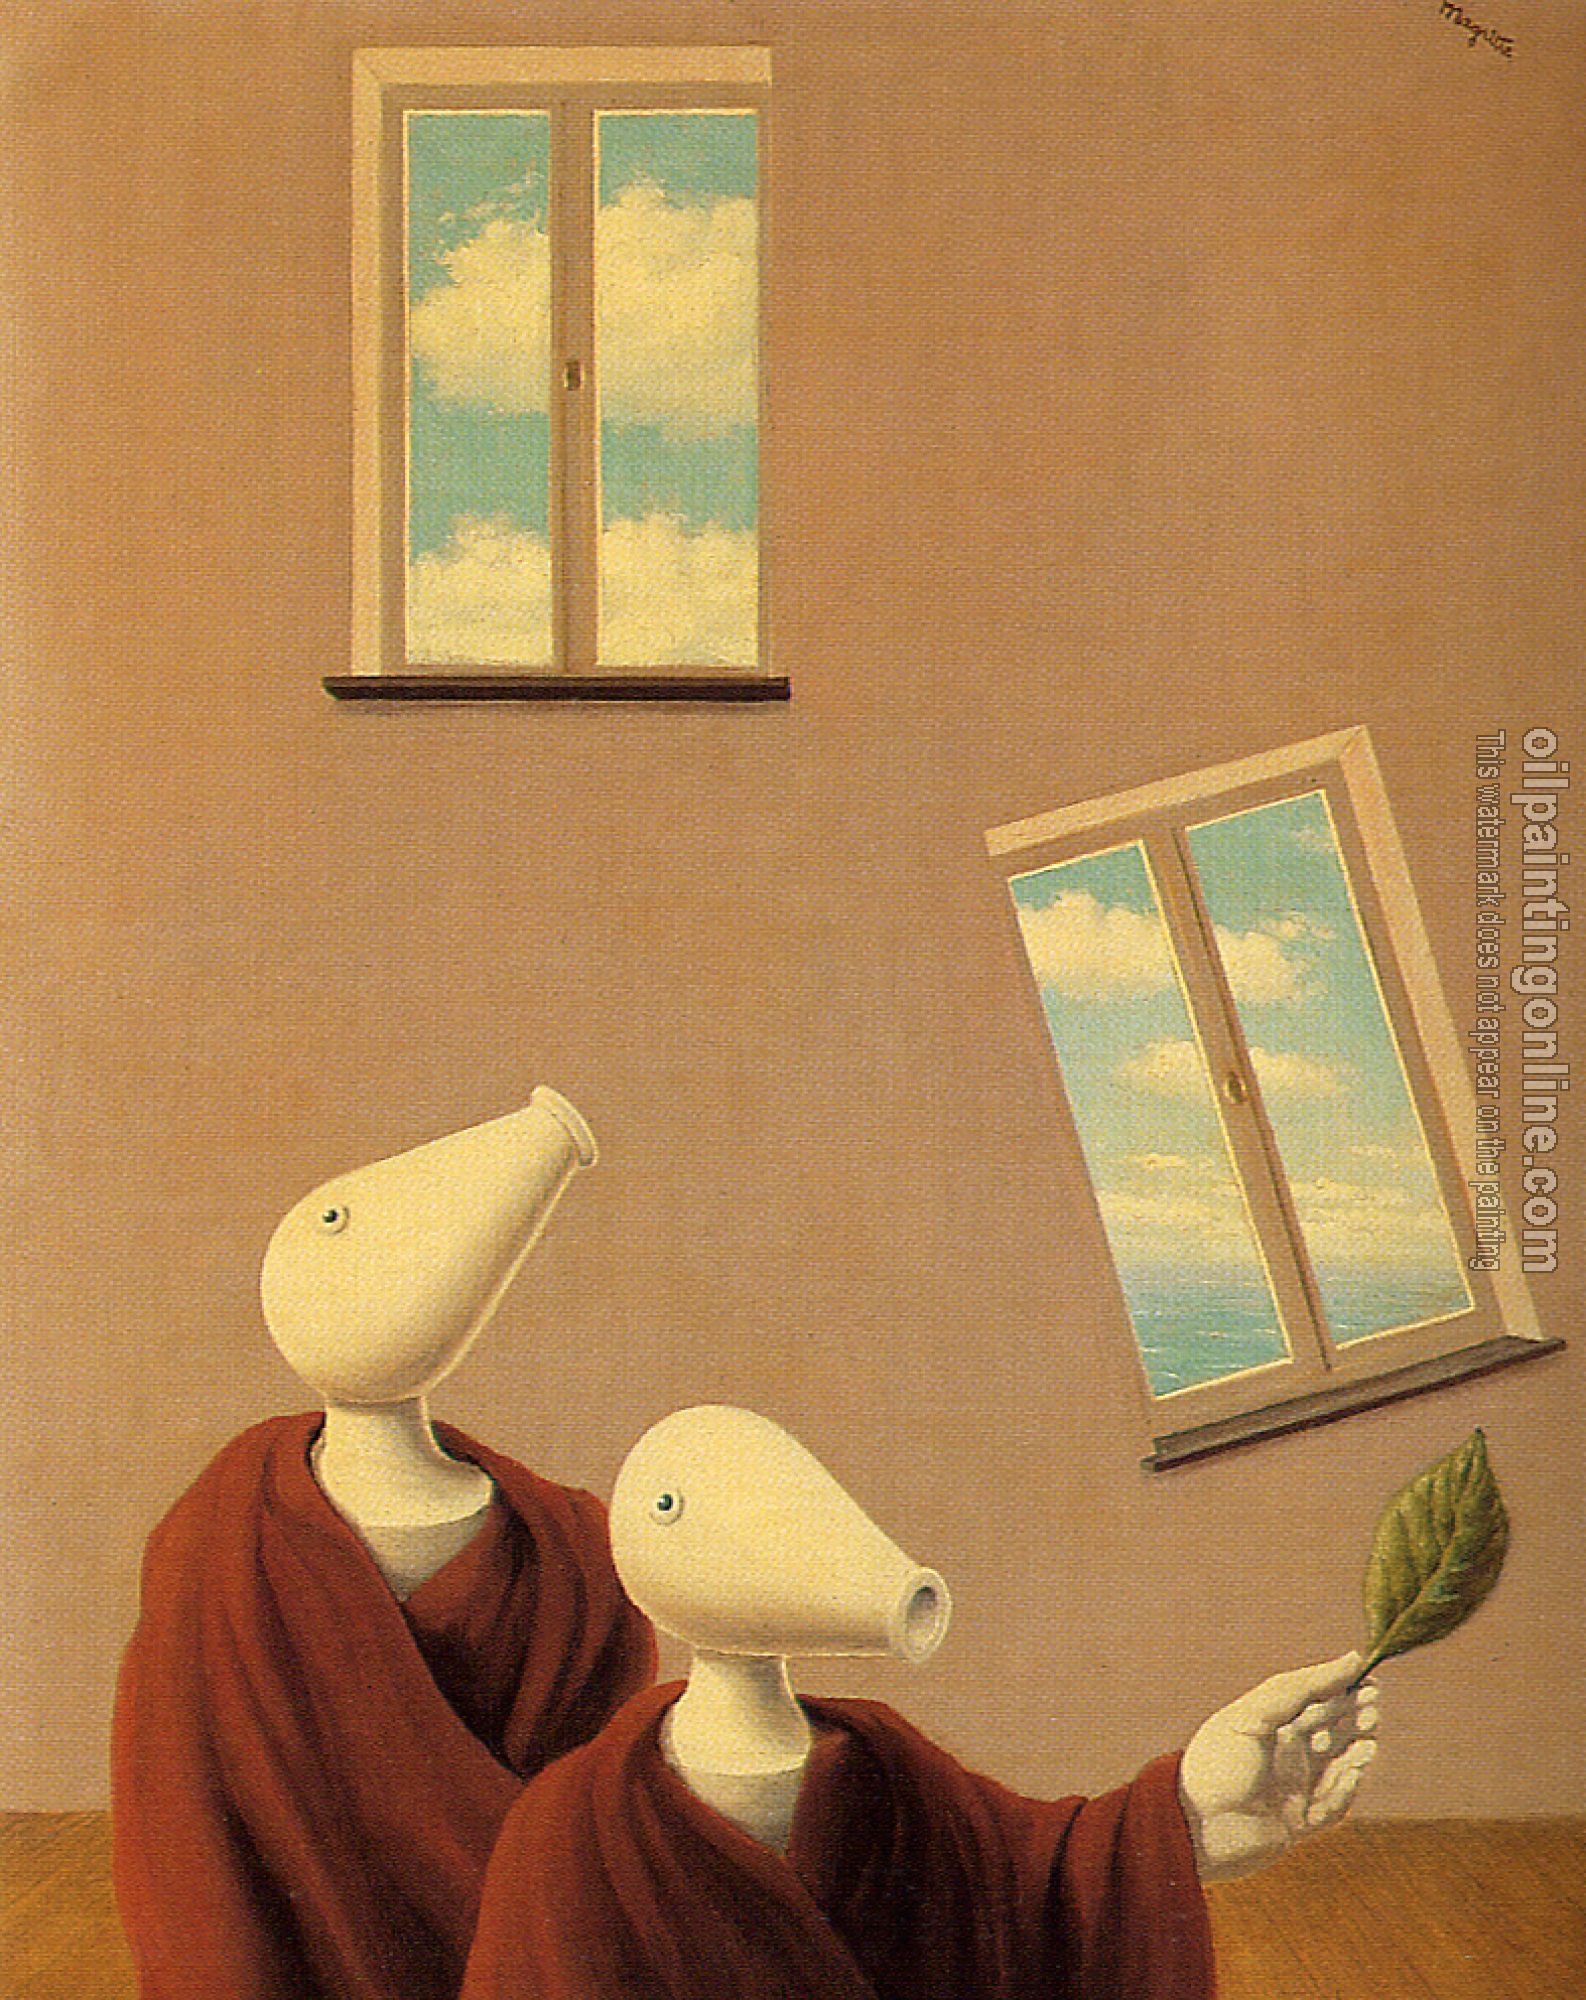 Magritte, Rene - natural encounters